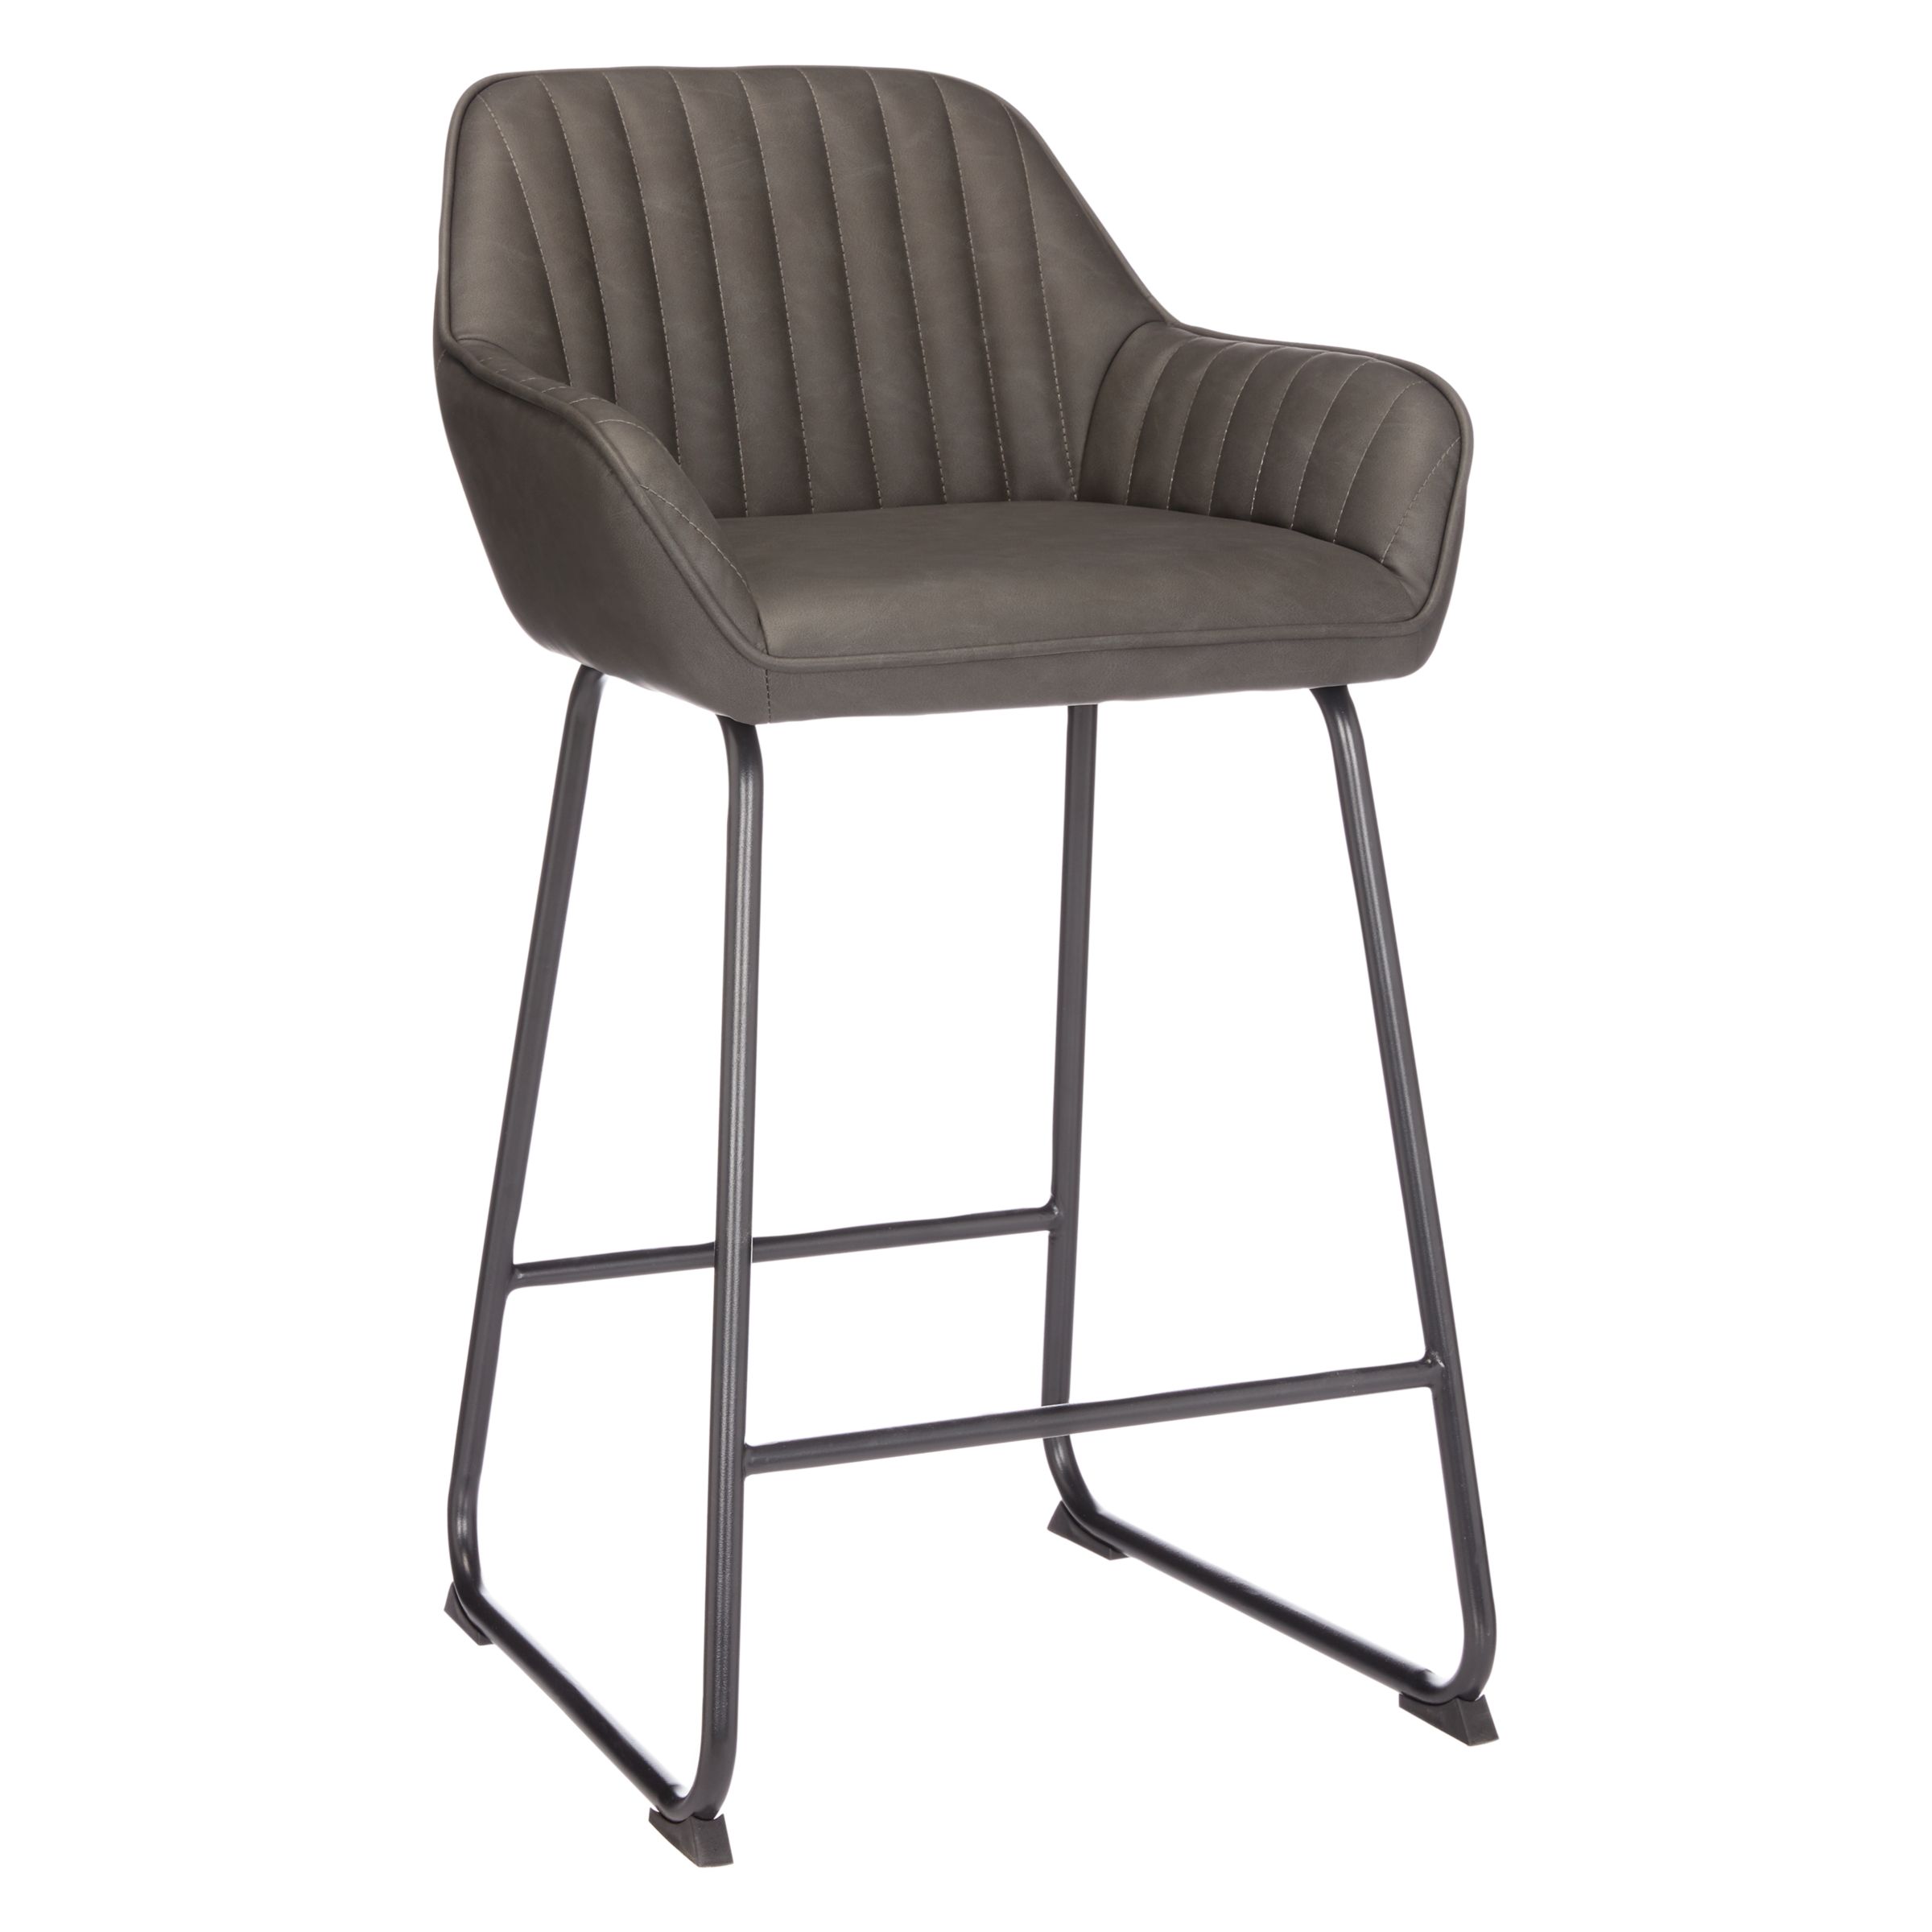 Grey Faux Leather Bar Chairs Stools, Faux Leather Bar Stools Uk